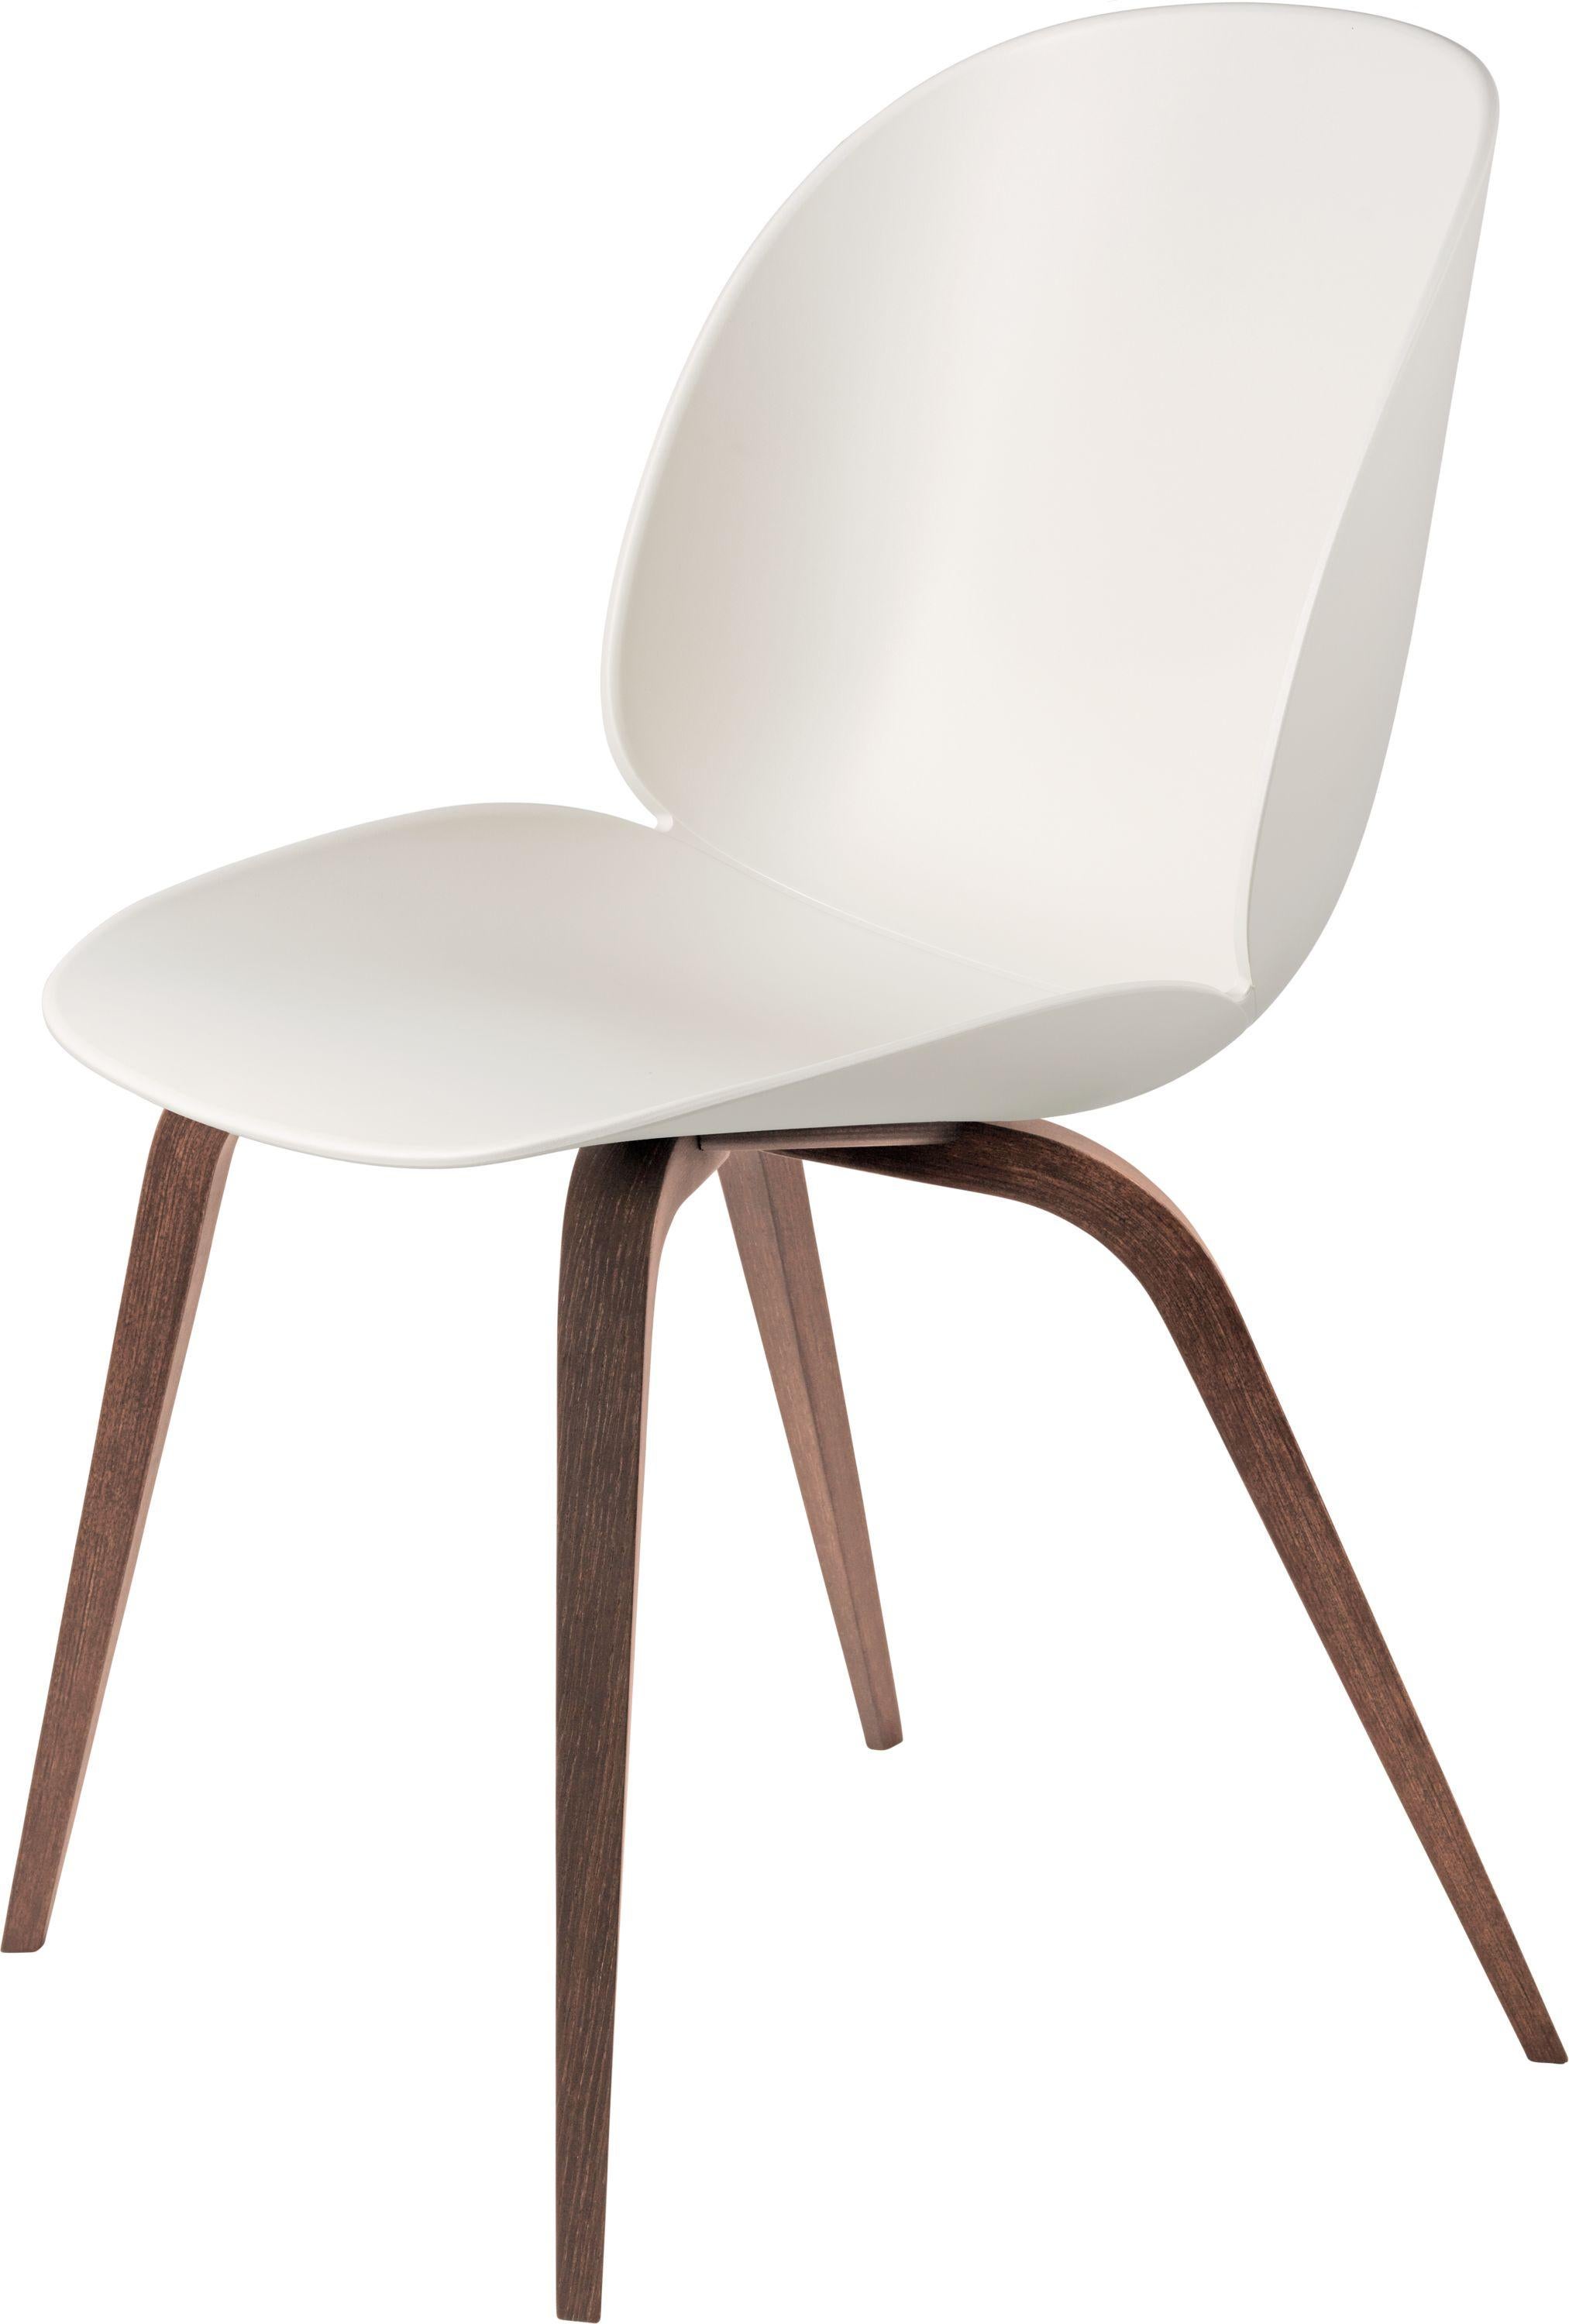 GamFratesi 'Beetle' dining chair with walnut conic base. Designed by Danish-Italian design-duo GamFratesi in 2013. The Beetle Chair’s durable outer shell is a continuous curved form reminiscent of the strong and graceful contours of the insect that